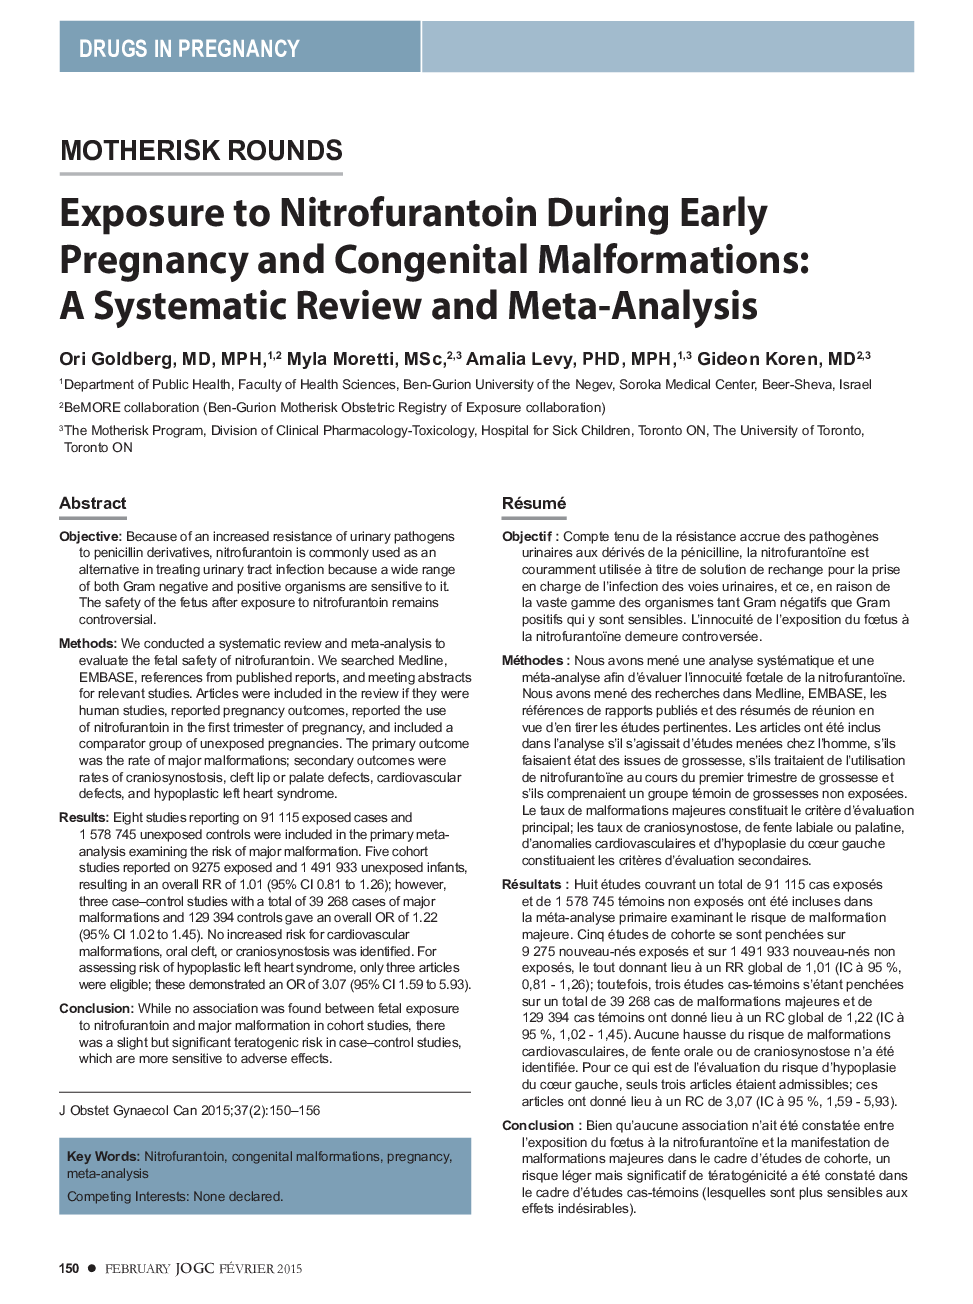 Exposure to Nitrofurantoin During Early Pregnancy and Congenital Malformations: A Systematic Review and Meta-Analysis